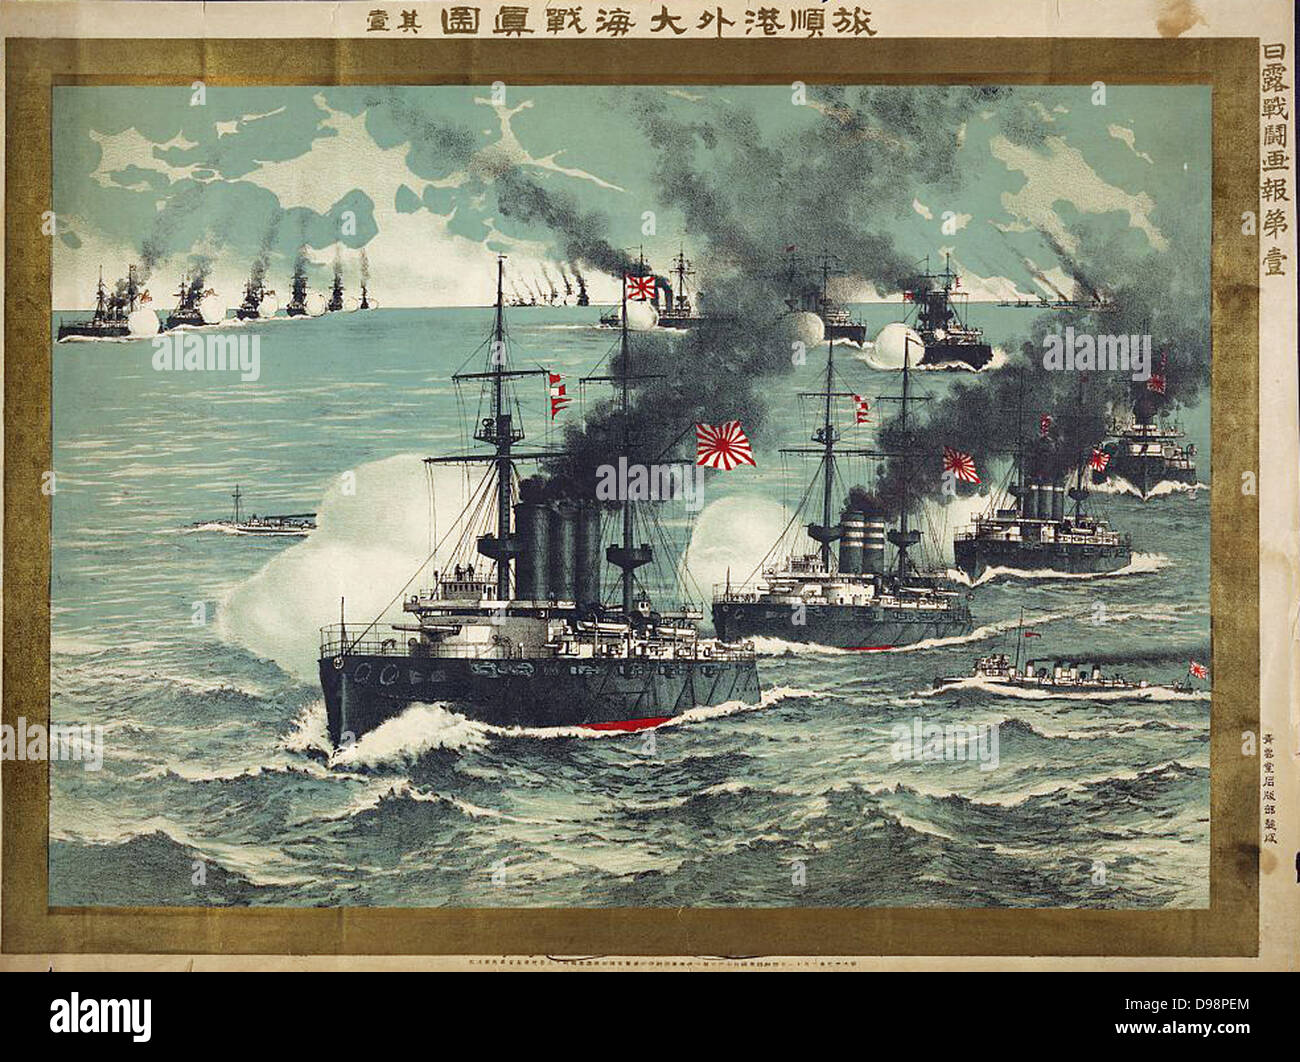 Russo-Japanese War 1904-1905: Surprise attack by Japanese battleships on the Russian fleet at Port Arthur (Lushun) 8 February 1904, battle inconclusive. Naval Bombardment Warship Transport Screw Steamer Japanese Stock Photo